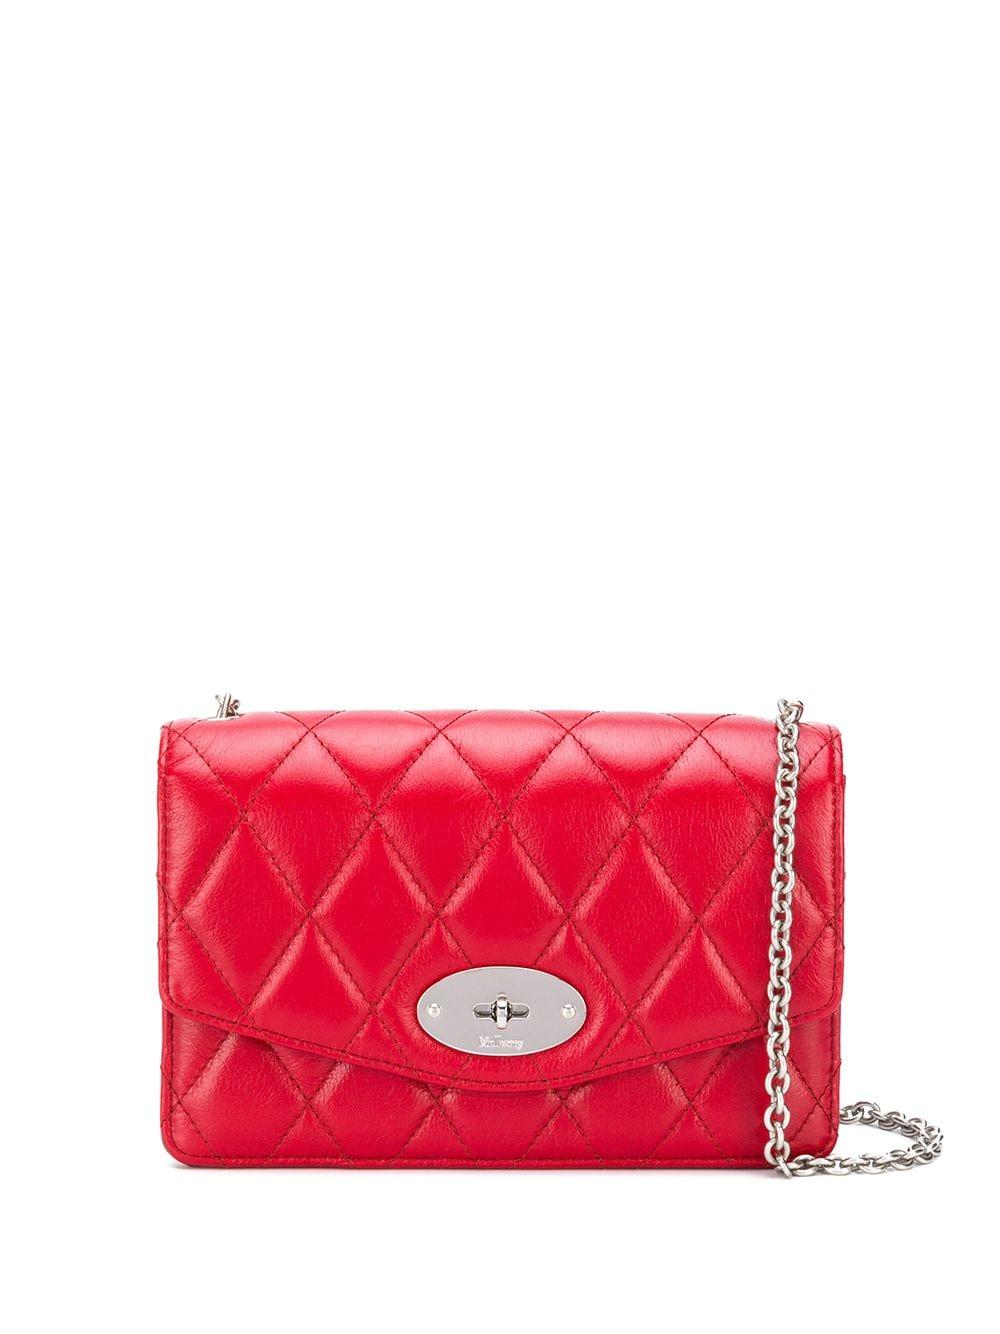 Mulberry Leather Darley Quilted Small Shoulder Bag in Red - Lyst